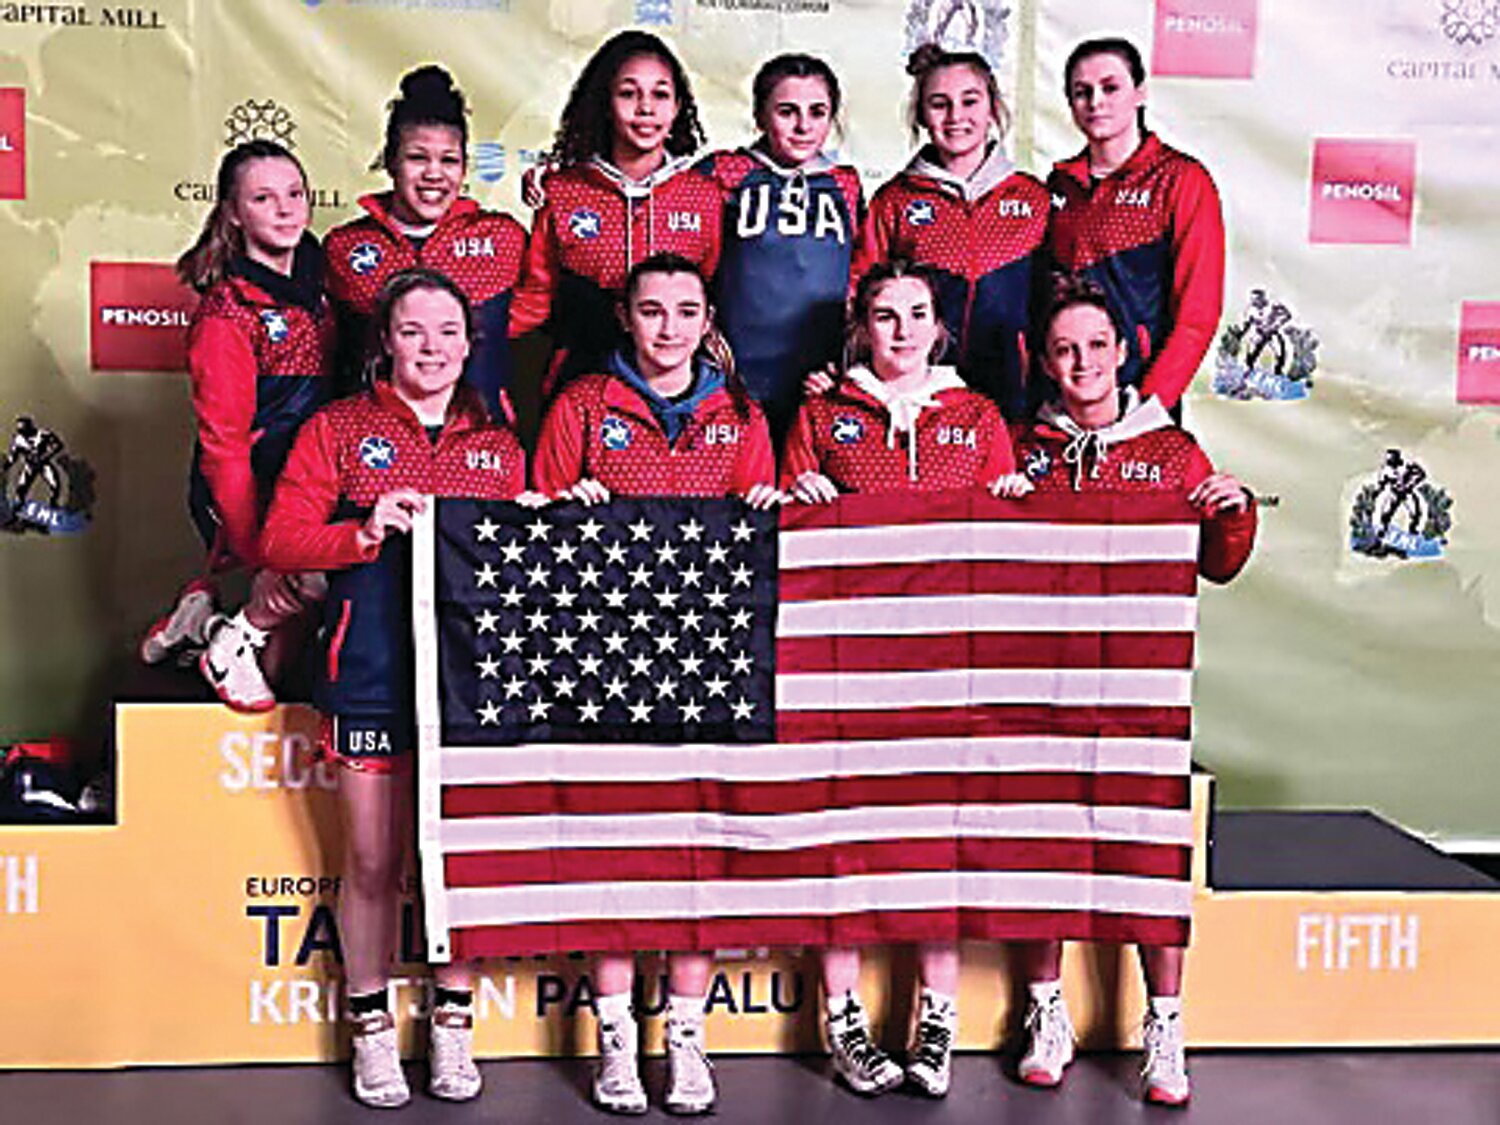 Savannah Witt and nine others recently represented the United States at the Tallin Open in Tallin, Estonia. Witt claimed bronze in her weight class.